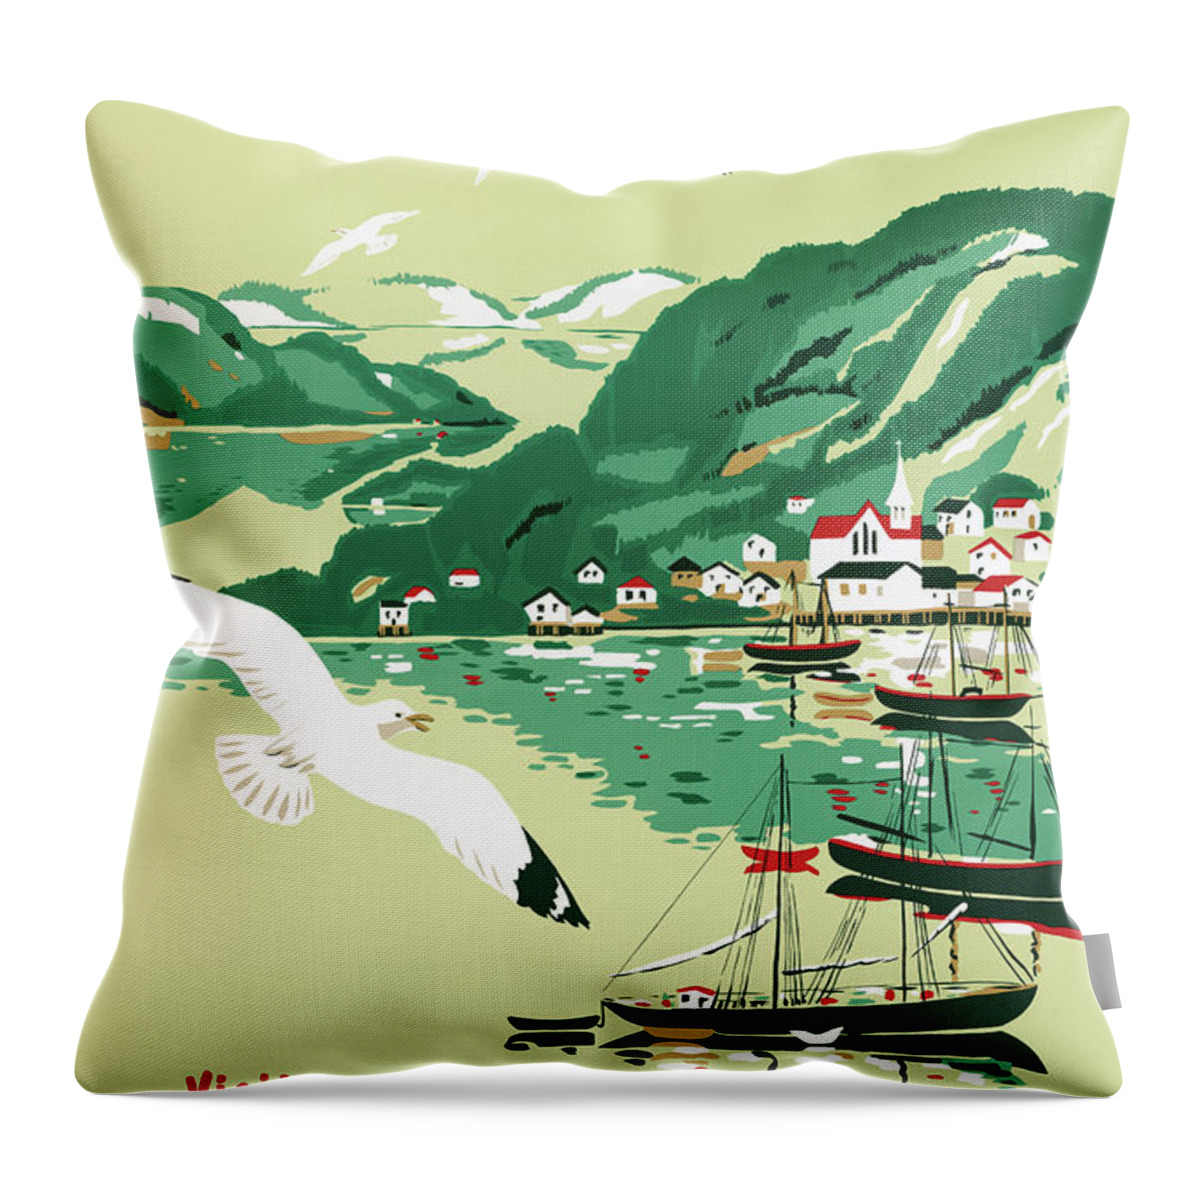 Vintage Throw Pillow featuring the drawing Newfoundland Vintage Travel Poster Restored by Vintage Treasure